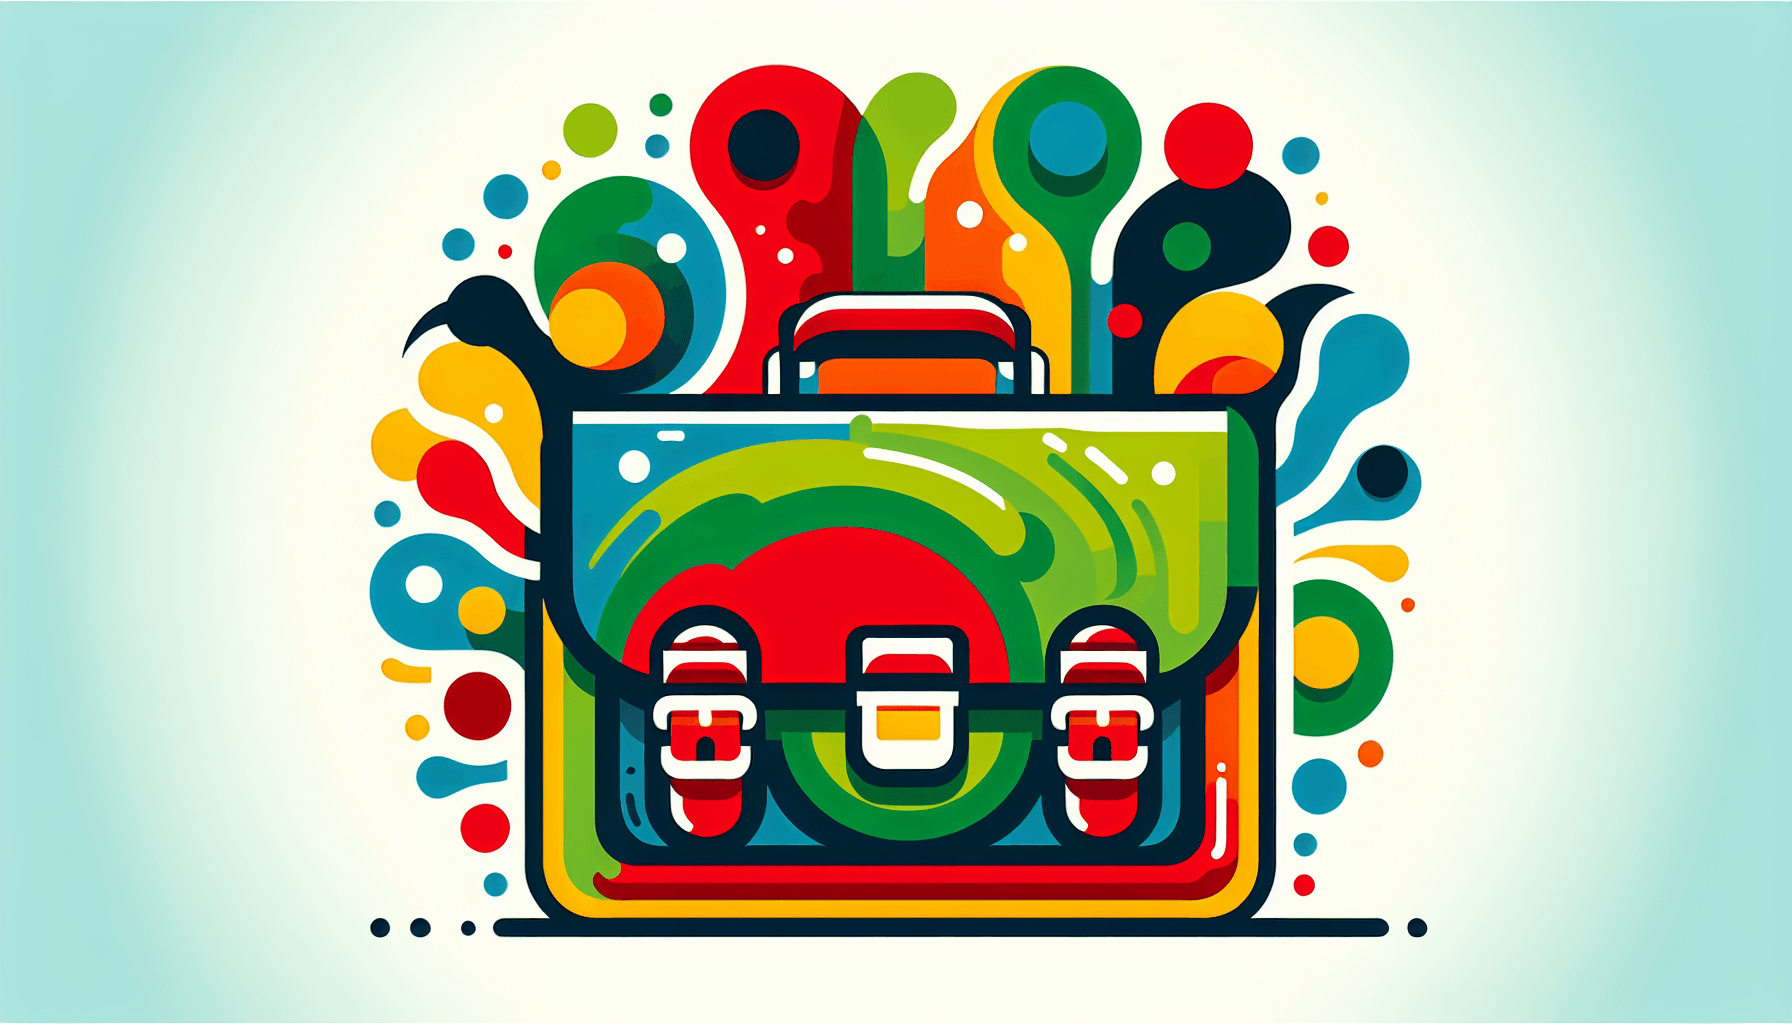 Briefcase in flat illustration style and white background, red #f47574, green #88c7a8, yellow #fcc44b, and blue #645bc8 colors.